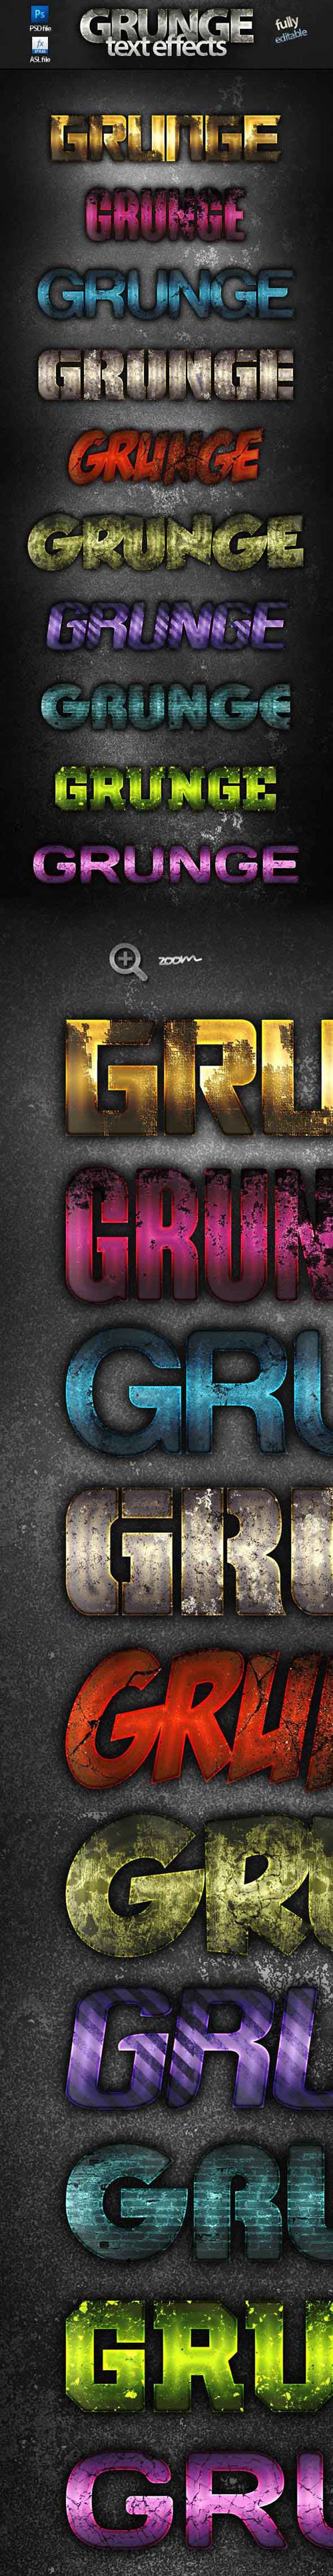 10 Grunge Text Effects Styles for Photoshop